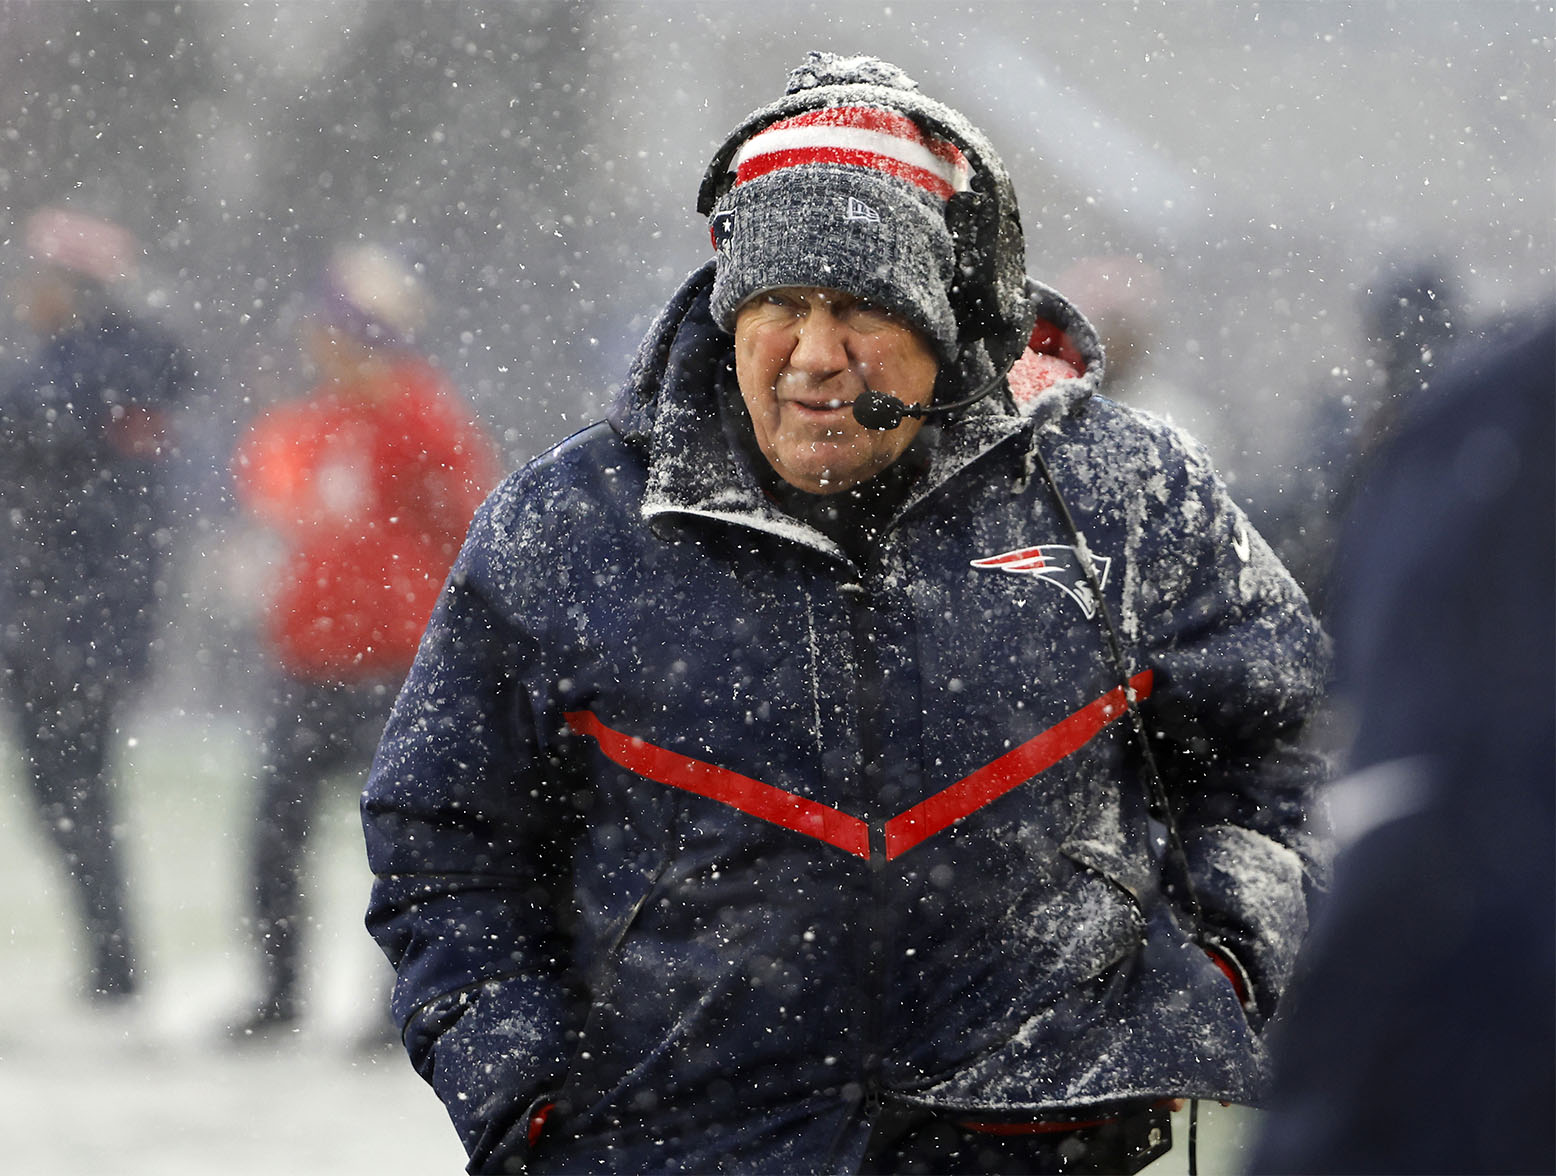 Bill Belichick mentioned his contract during his Monday morning press conference, in a departure from his usual norm. (Photo by Winslow Townson/Getty Images)